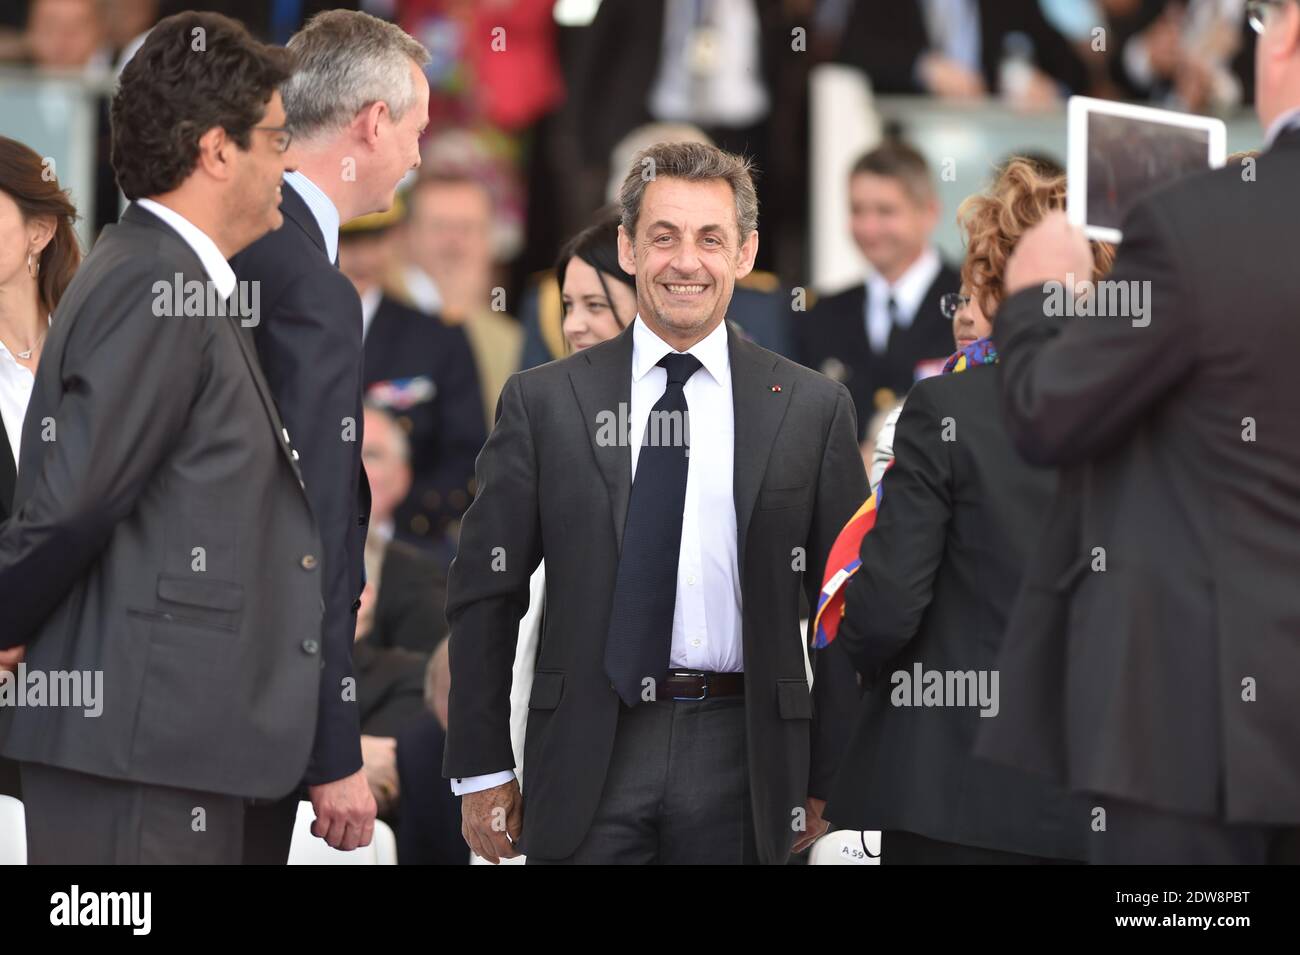 Nicolas Sarkozy attends the International Ceremony at Sword Beach in Ouistreham, as part of the official ceremonies on the occasion of the D-Day 70th Anniversary, on June 6, 2014 in Normandy, France. Photo by Abd Rabbo-Bernard-Gouhier-Mousse/ABACAPRESS.COM Stock Photo